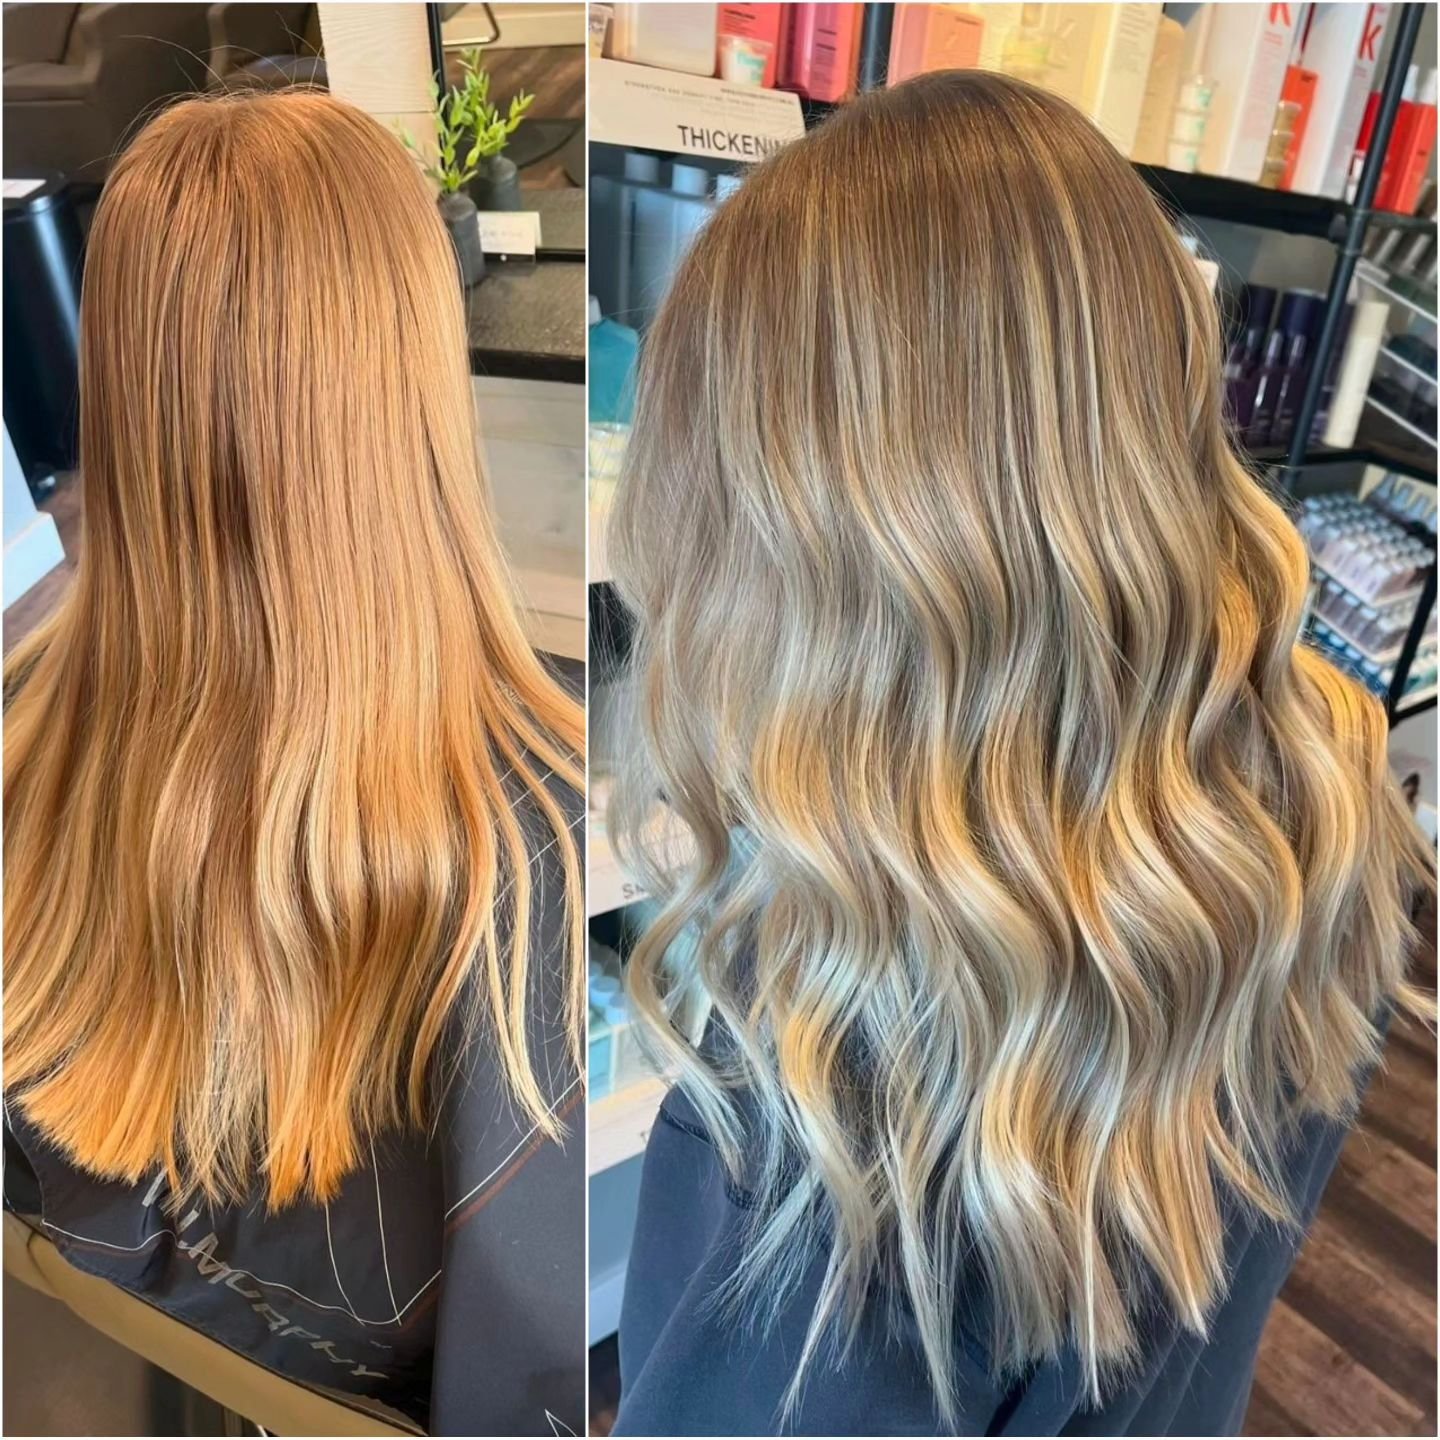 Summer balayage before and ➡️ after by @hair_by_kaylaruhoff 
#luxehairwinona #winonamn #winonamnhair